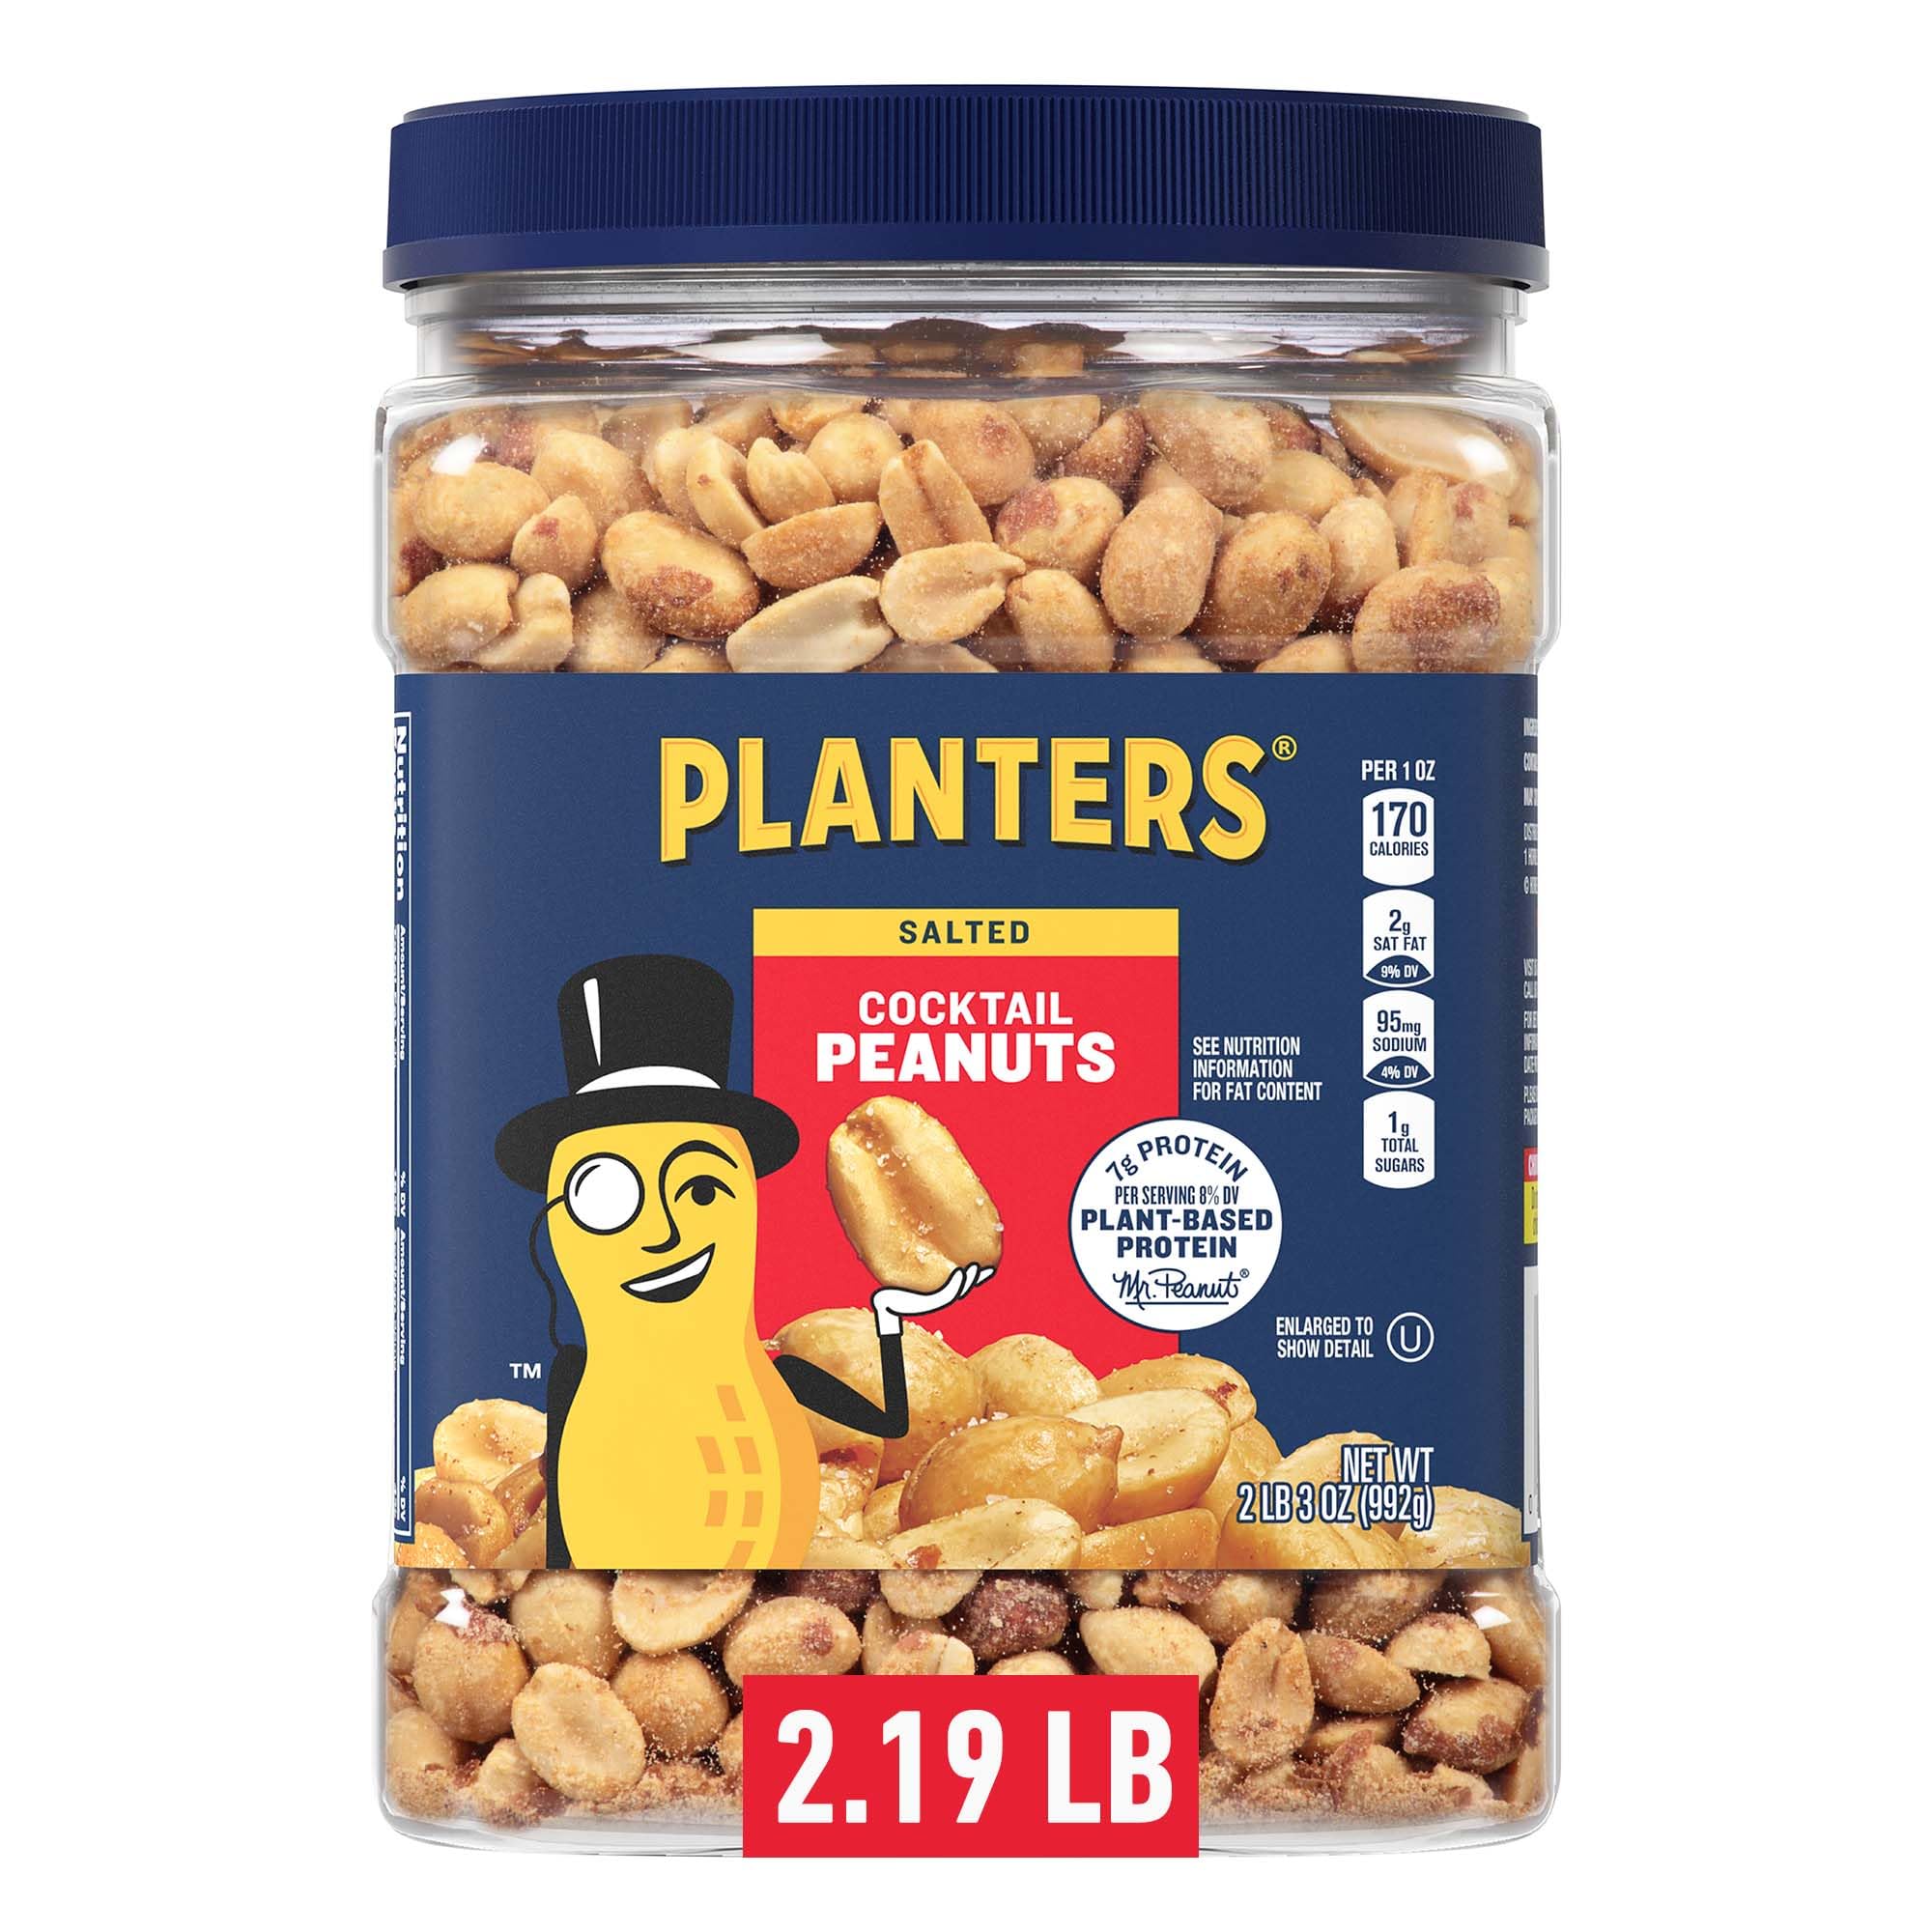 35-Oz PLANTERS Salted Cocktail Peanuts $5.25 w/ S&S + Free Shipping w/ Prime or on $35+